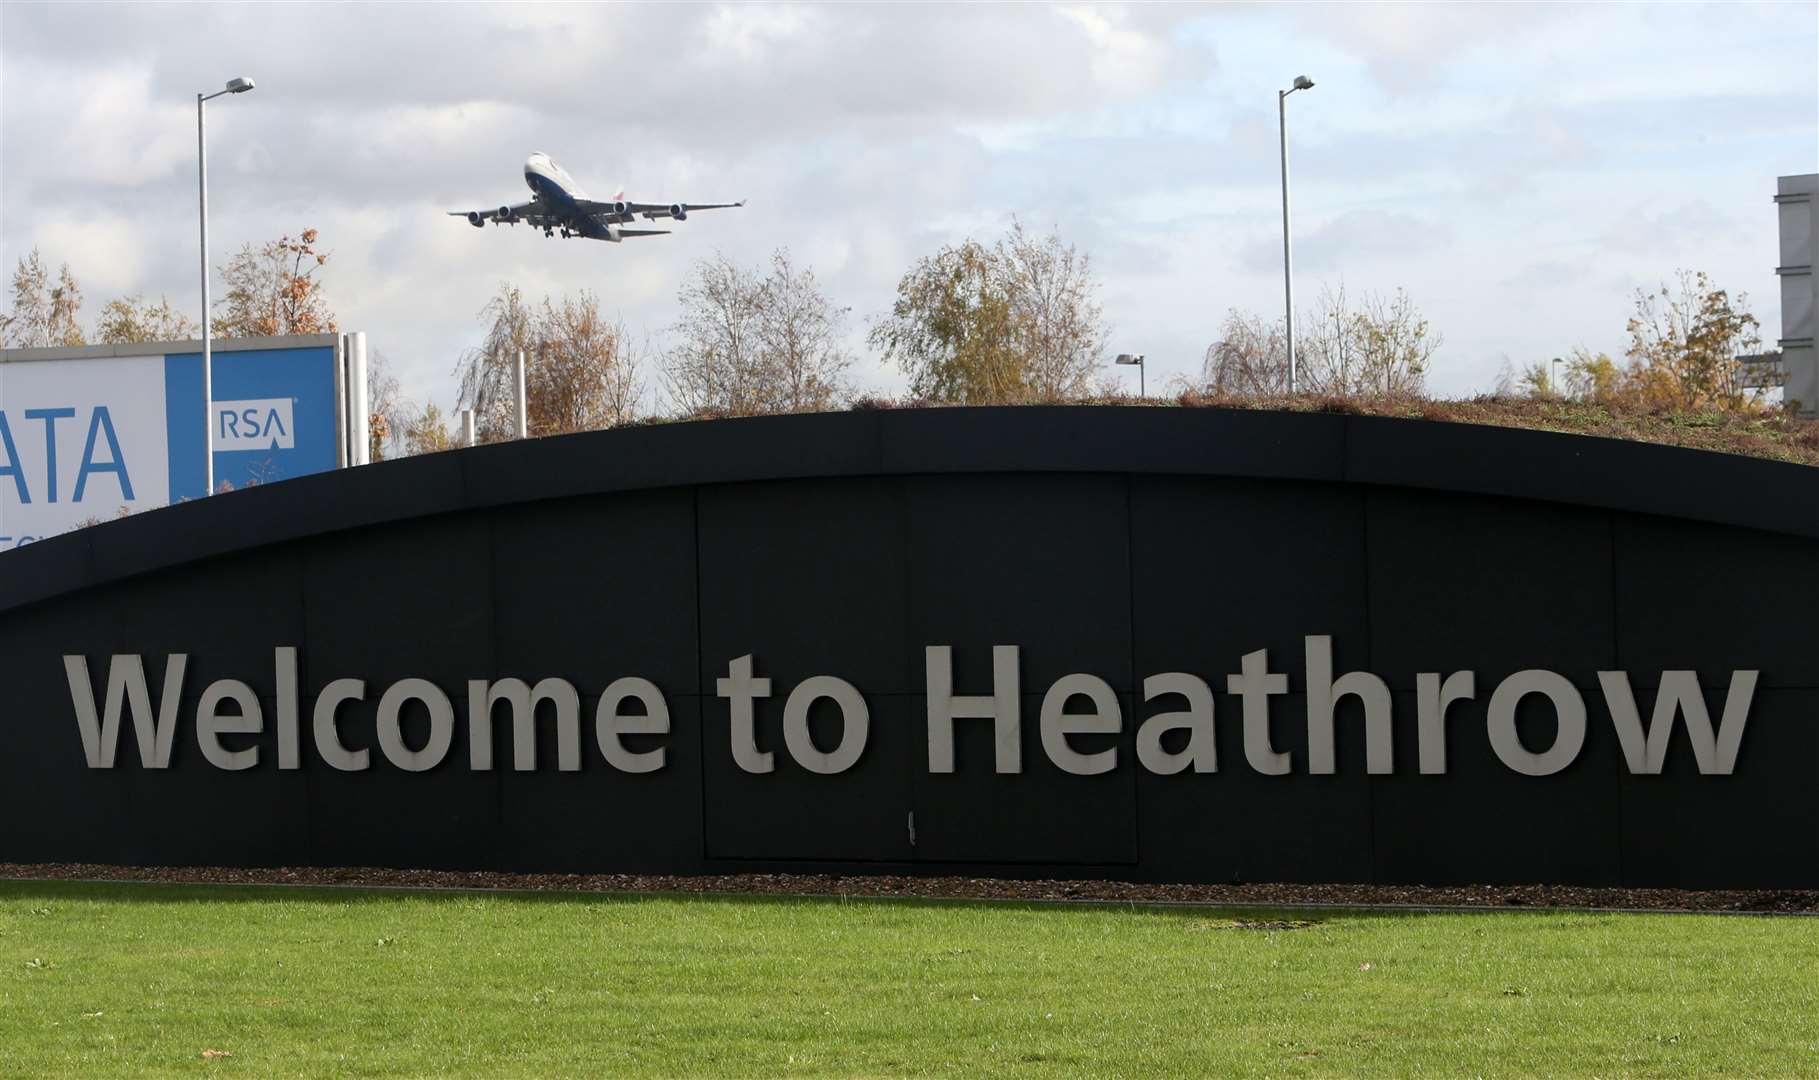 The deputy marshal was arrested after his flight arrived at Heathrow (PA)